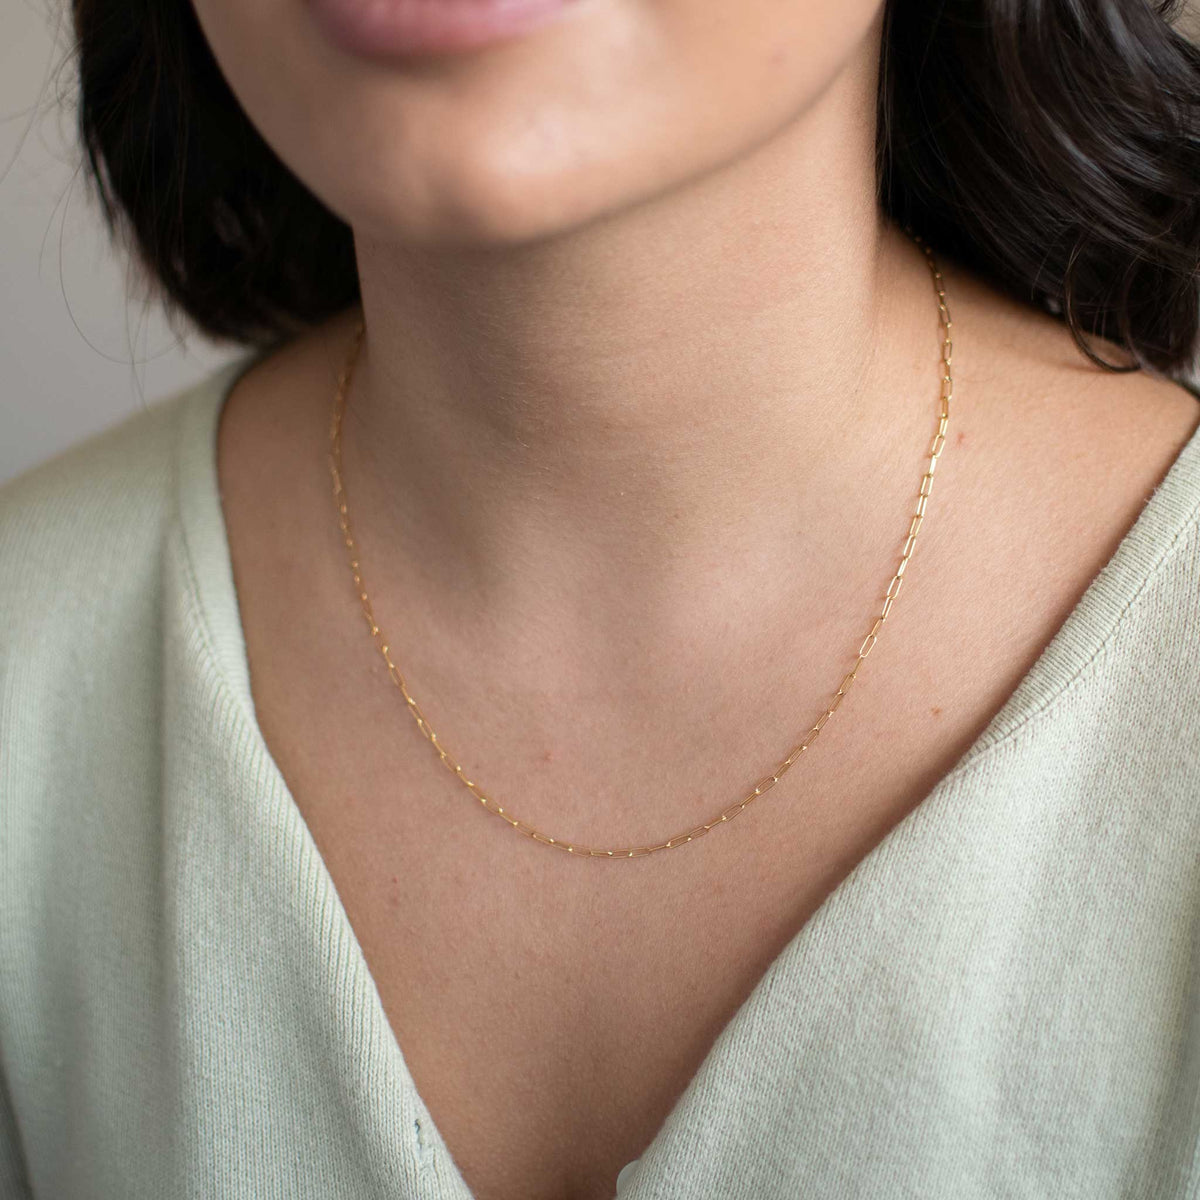 Front view of the small link chain worn by a woman. 